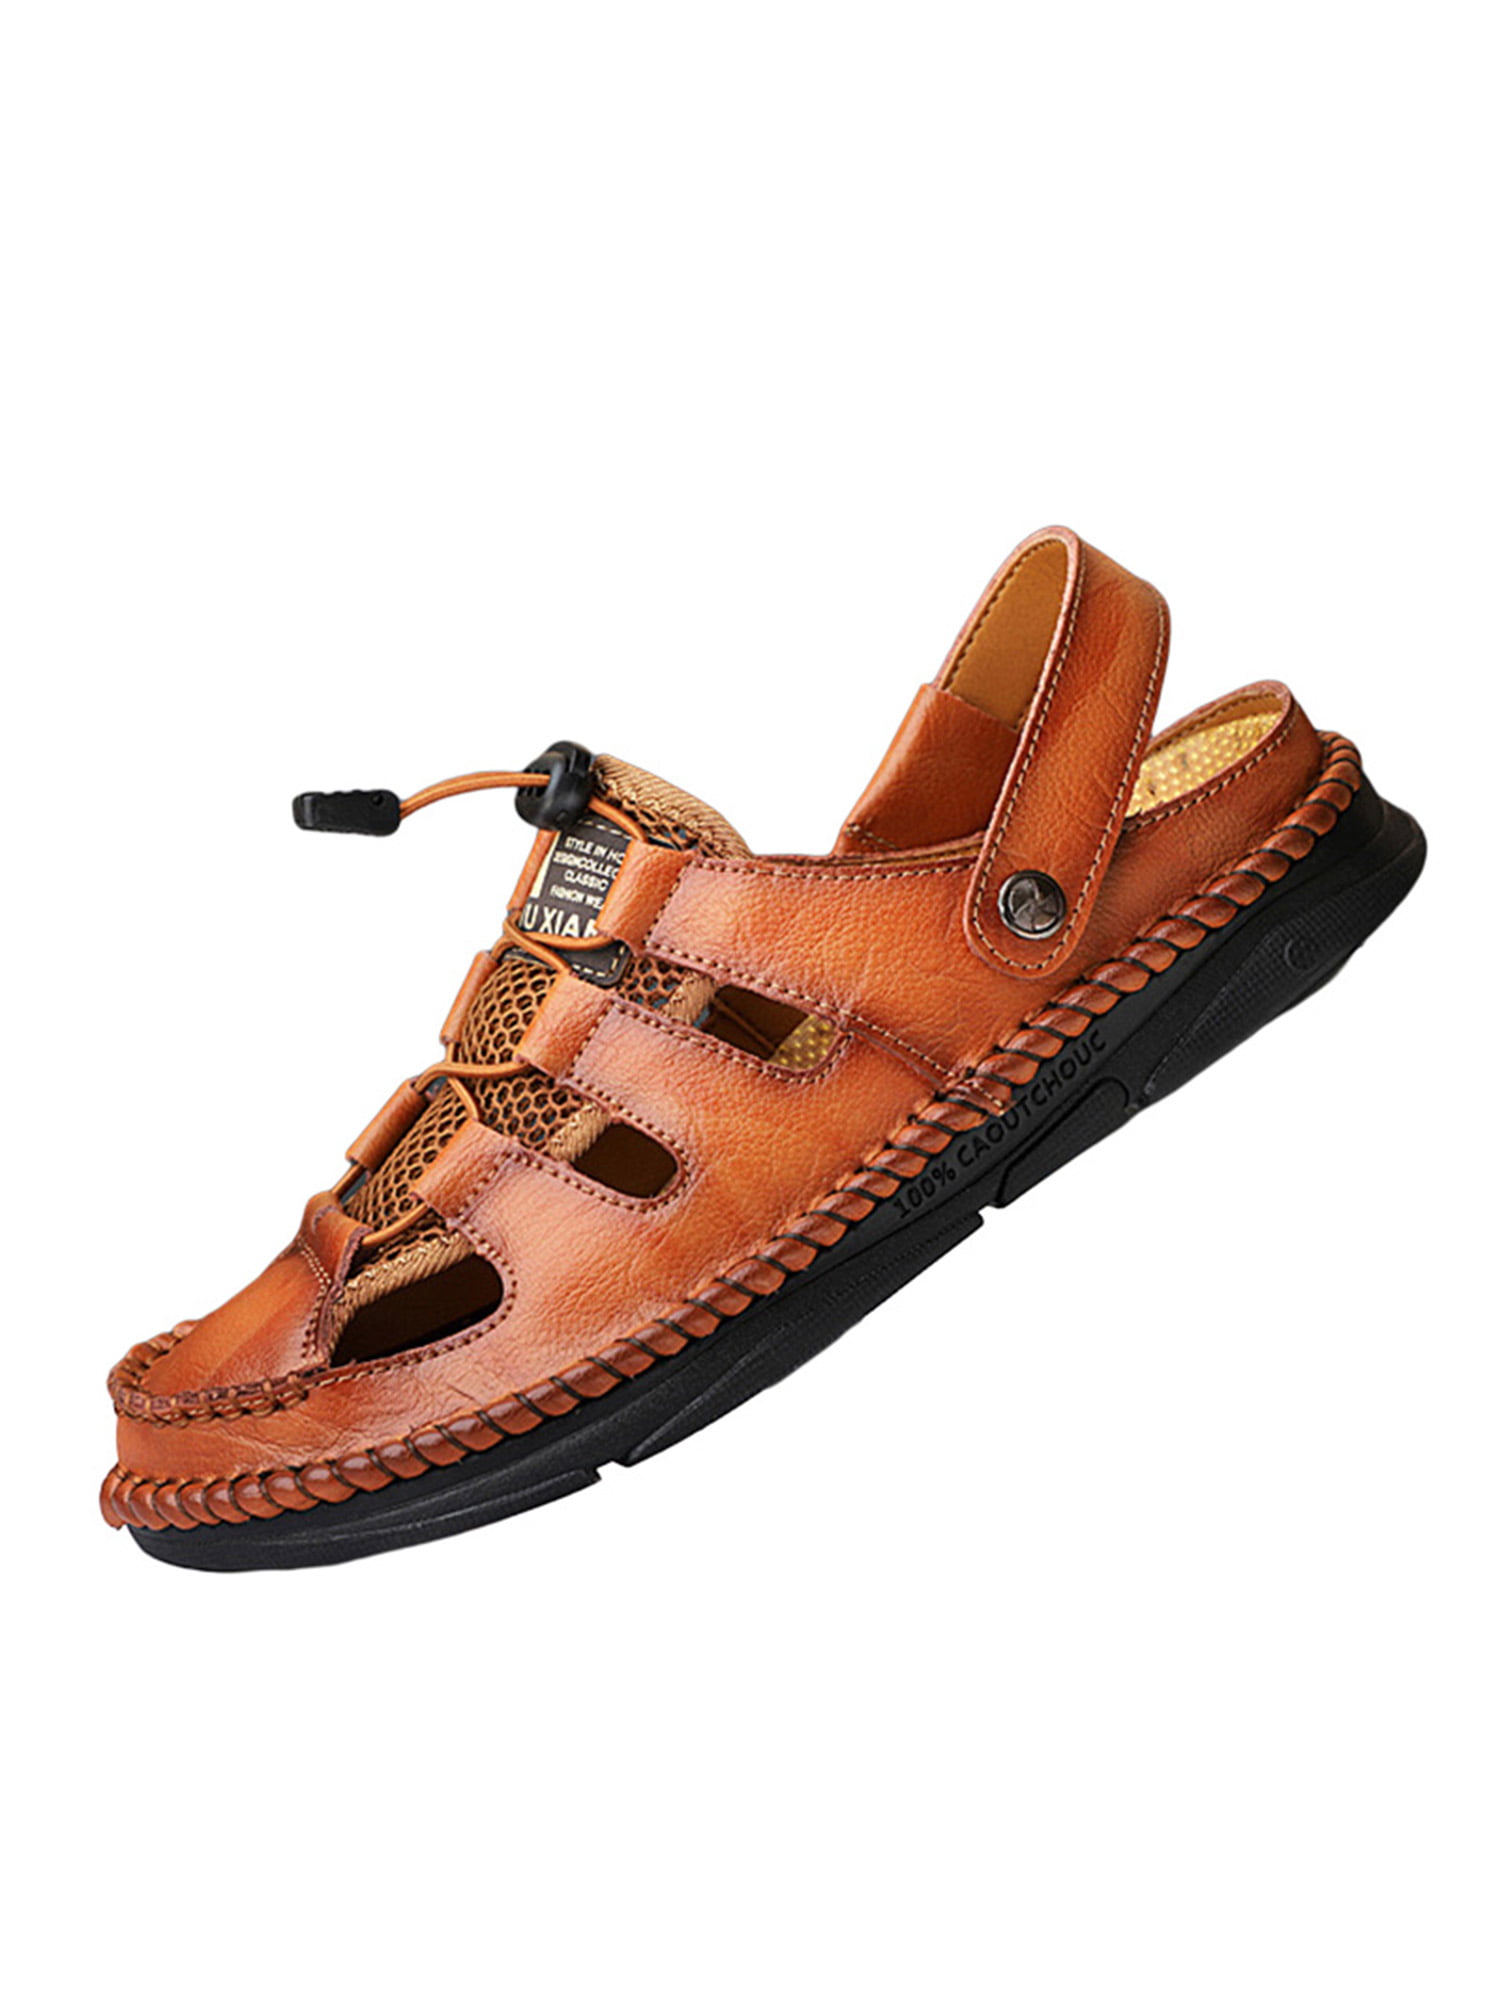 Men Leather Summer Beach Sandals Closed Toe Outdoor Sports Casual Non-Slip Shoes